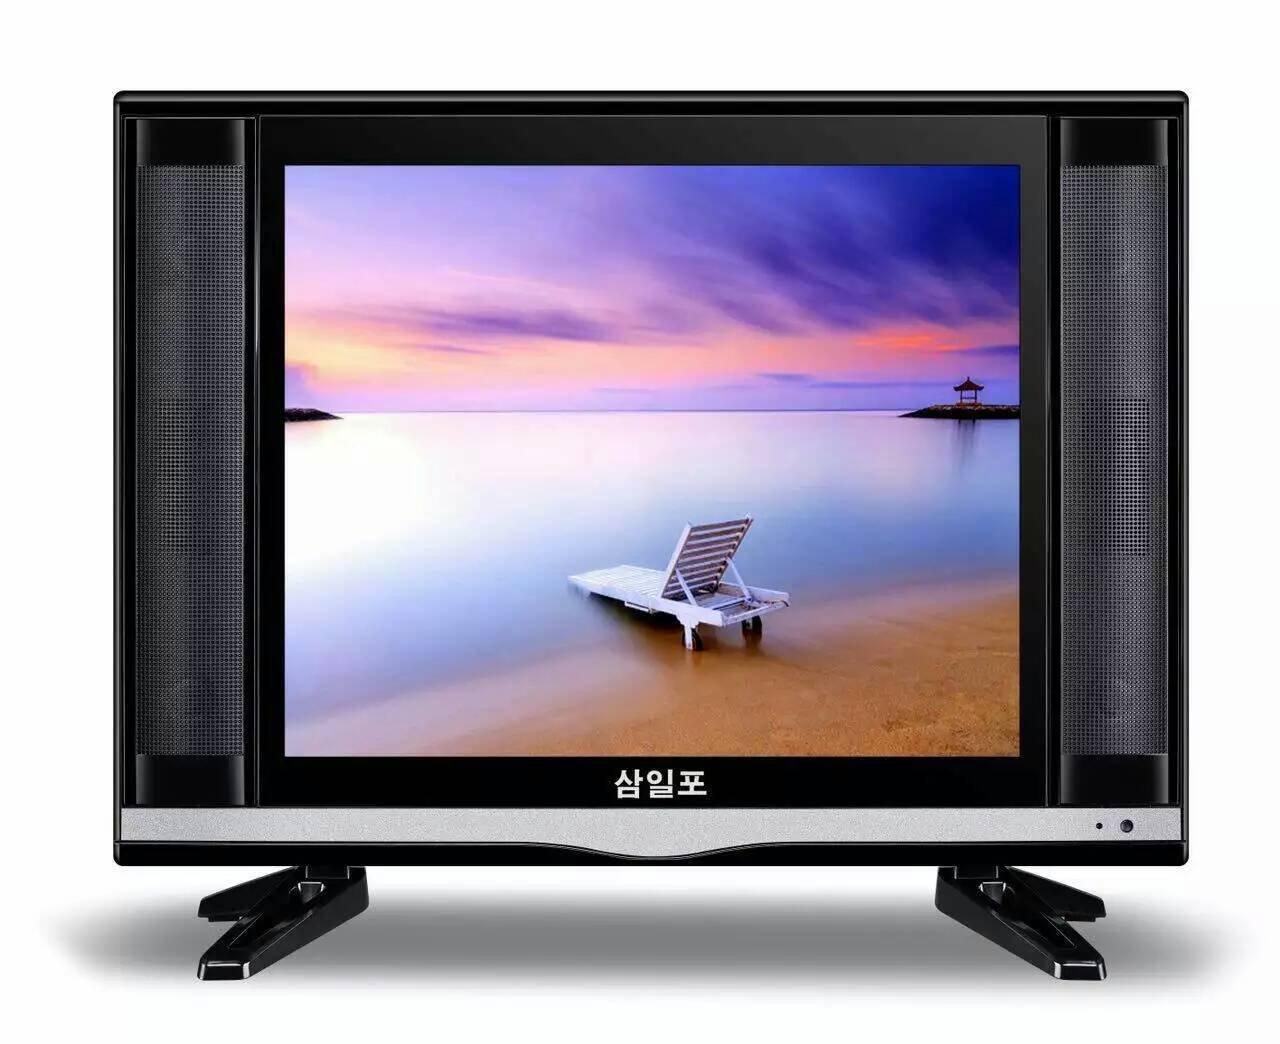 Xinyao LCD 17 inch tv price fashion design for lcd tv screen-1